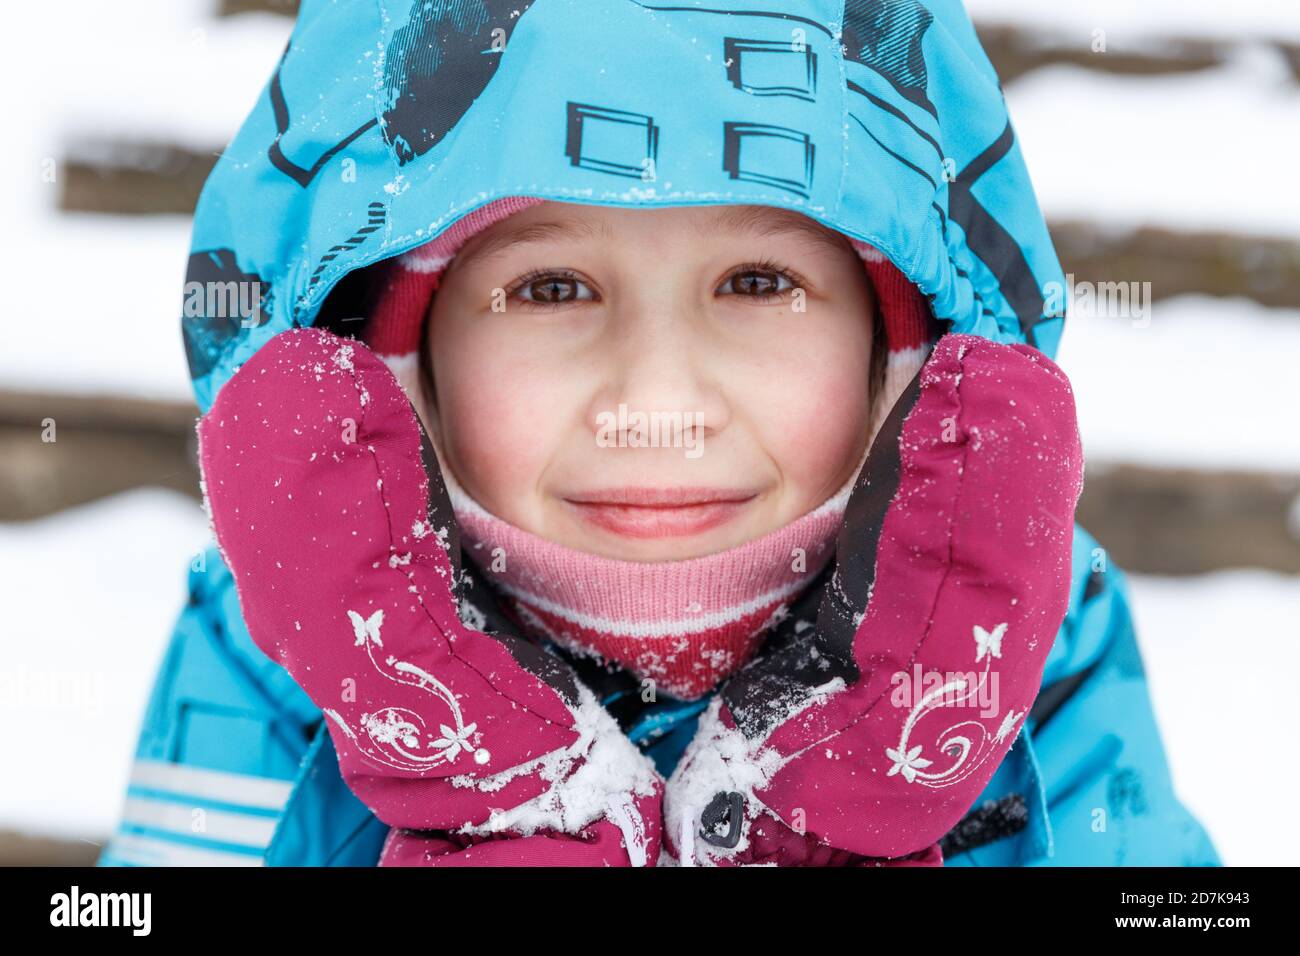 Close-up portrait of cute caucasian baby in winter clothes. A 6-7 year old girl with ruddy cheeks from frost, in winter overalls and mittens, looks at Stock Photo